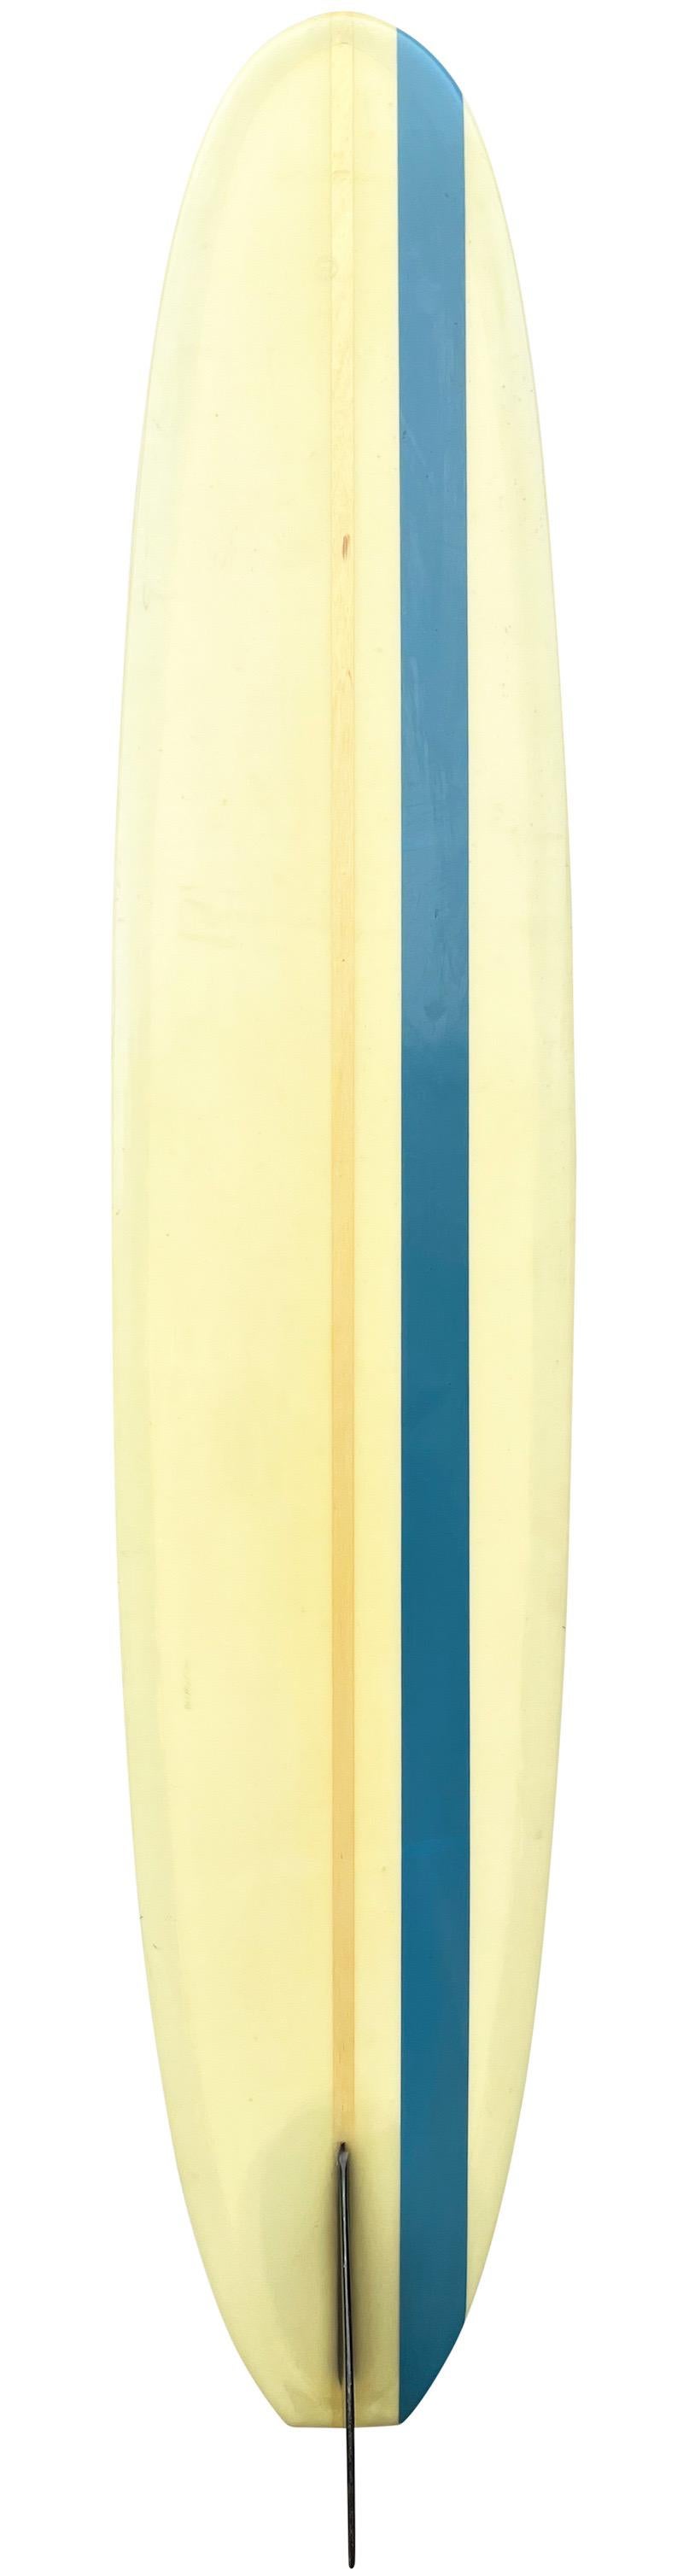 Early-1960s Gordie surfboards longboard “The Only Way to Travel”. Features a Classic 60s longboard shape with vibrant blue stripes and fixed black single fin. A superb example of a well cared for all original longboard made in the 1960s.